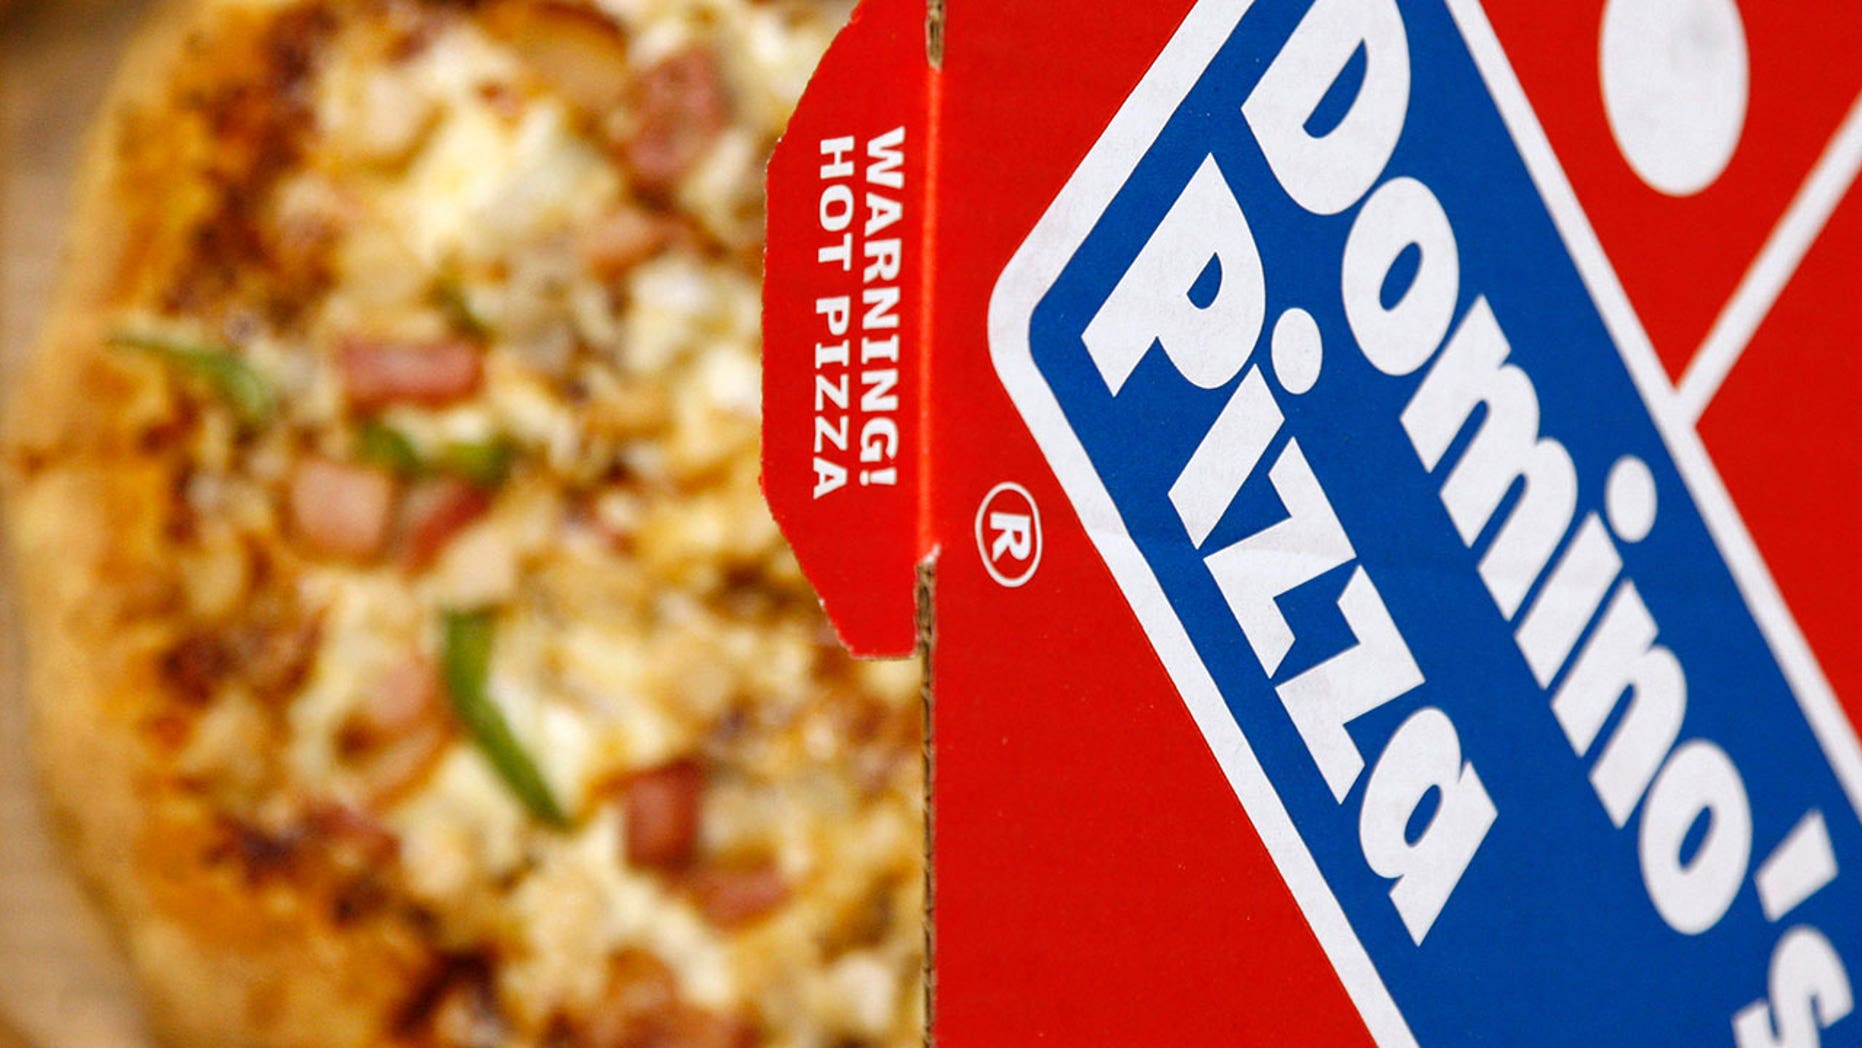 Dominos Pizza Delivery Man Fired